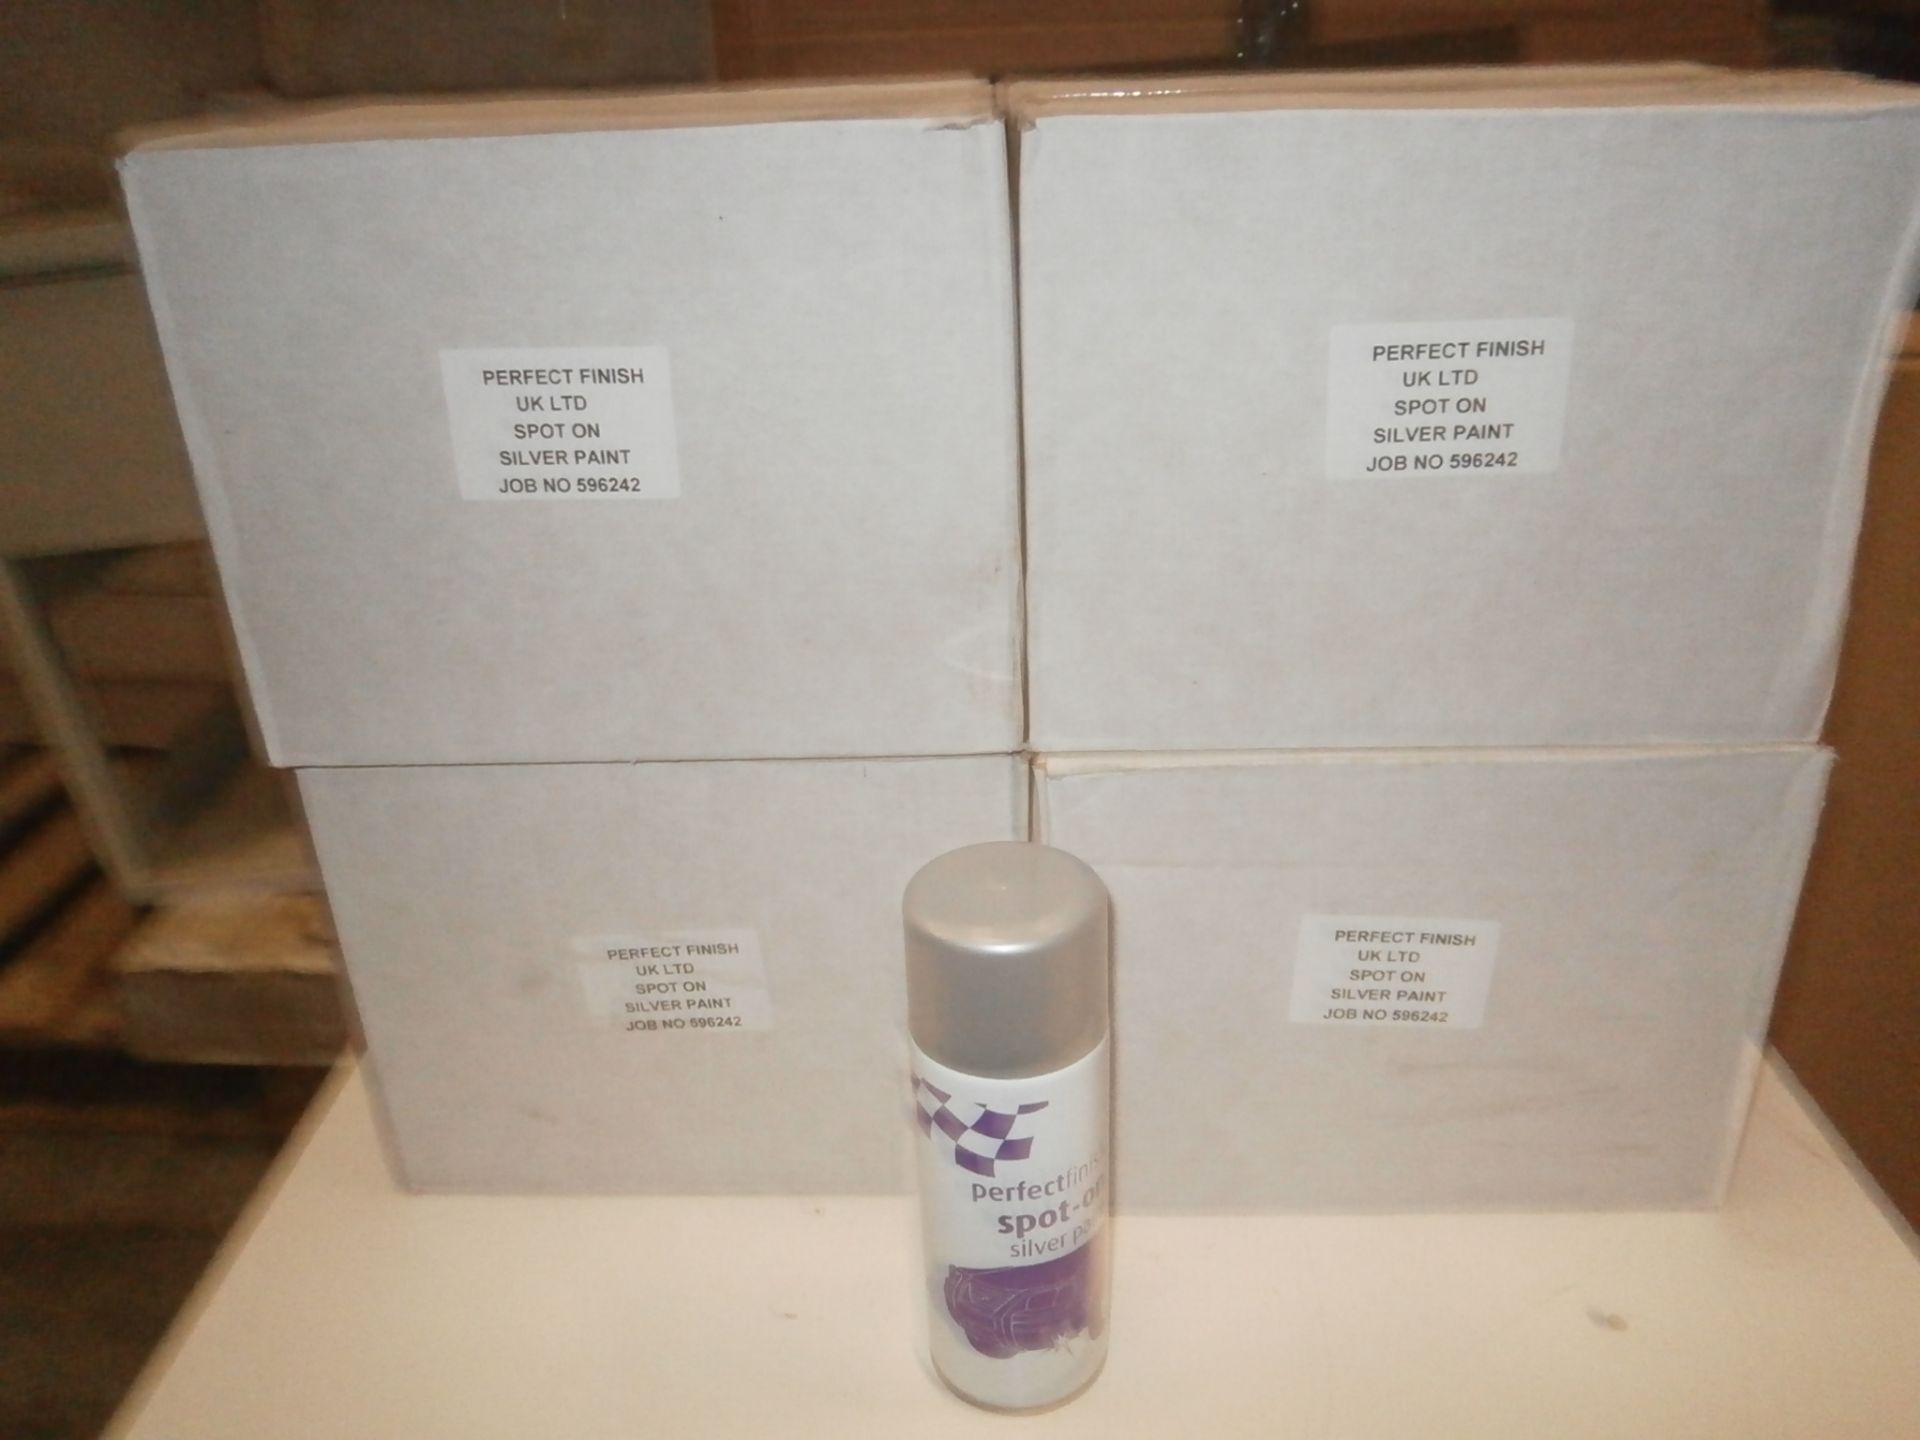 4 Boxes Of Perfectfinish Spot On Silver Spray Paint 12 per box 48 tins total (CS)